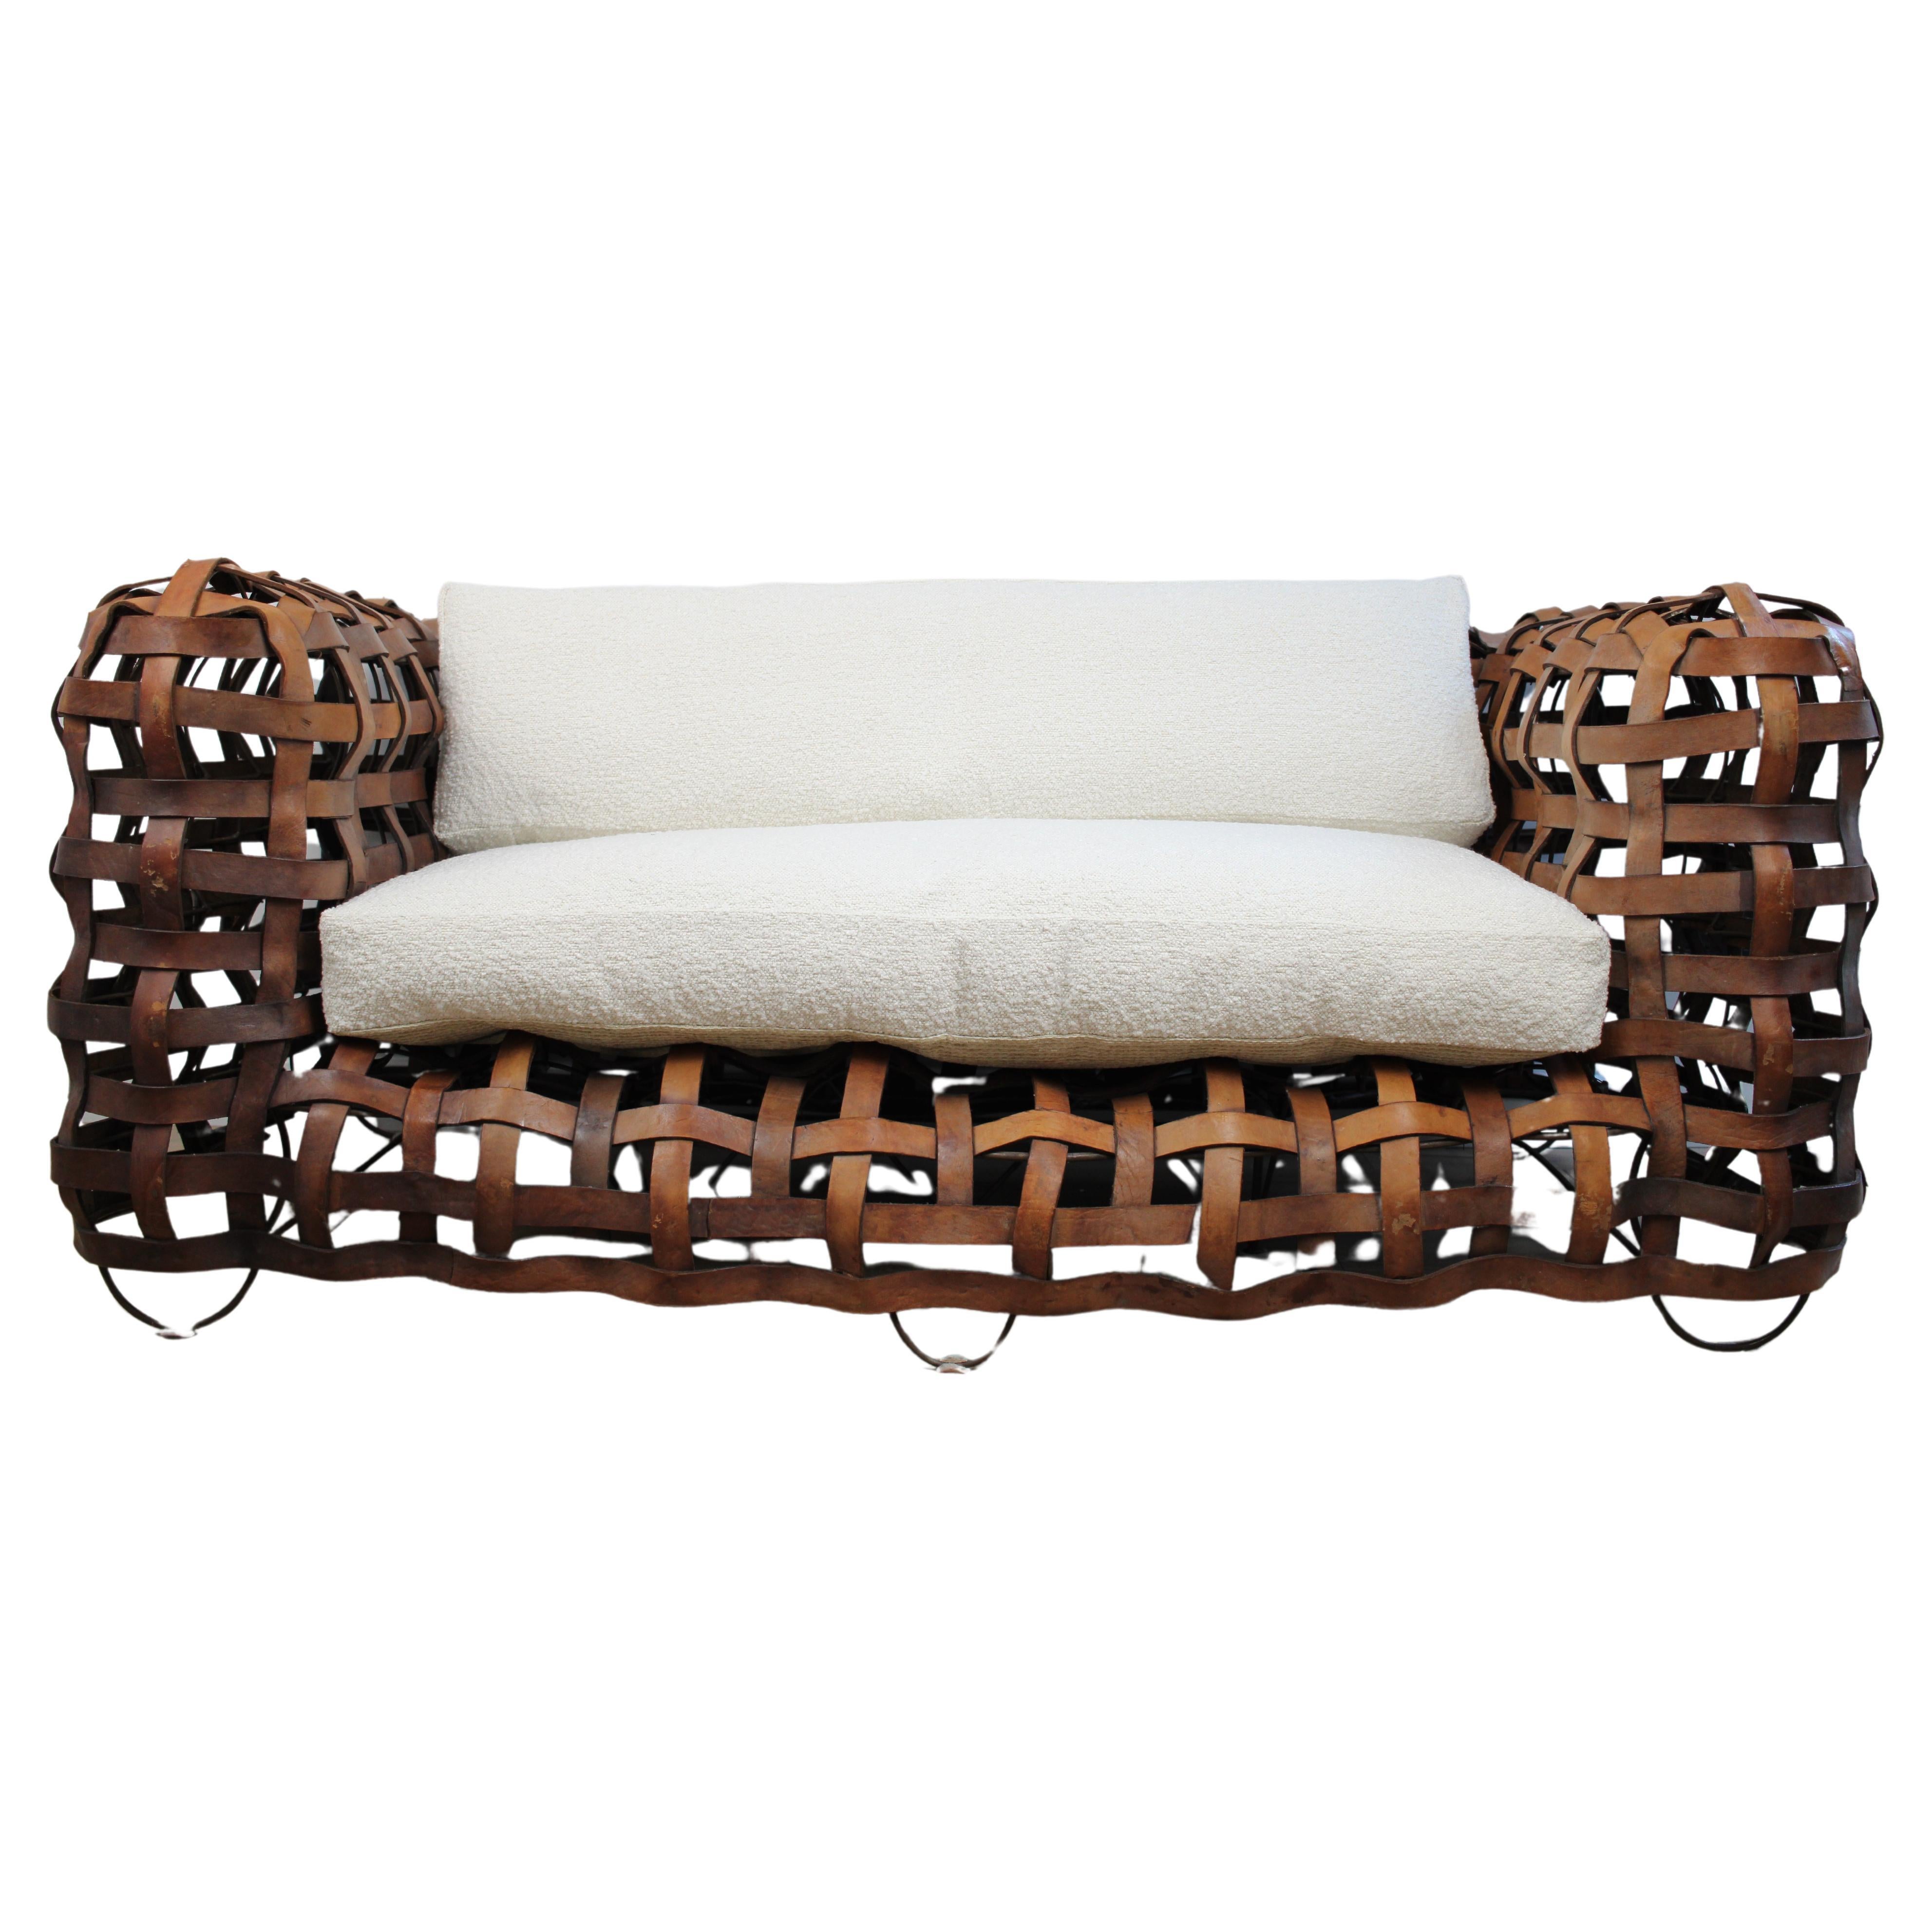 A sculptural Vintage woven leather strap sofa with feather cushions in boucle For Sale